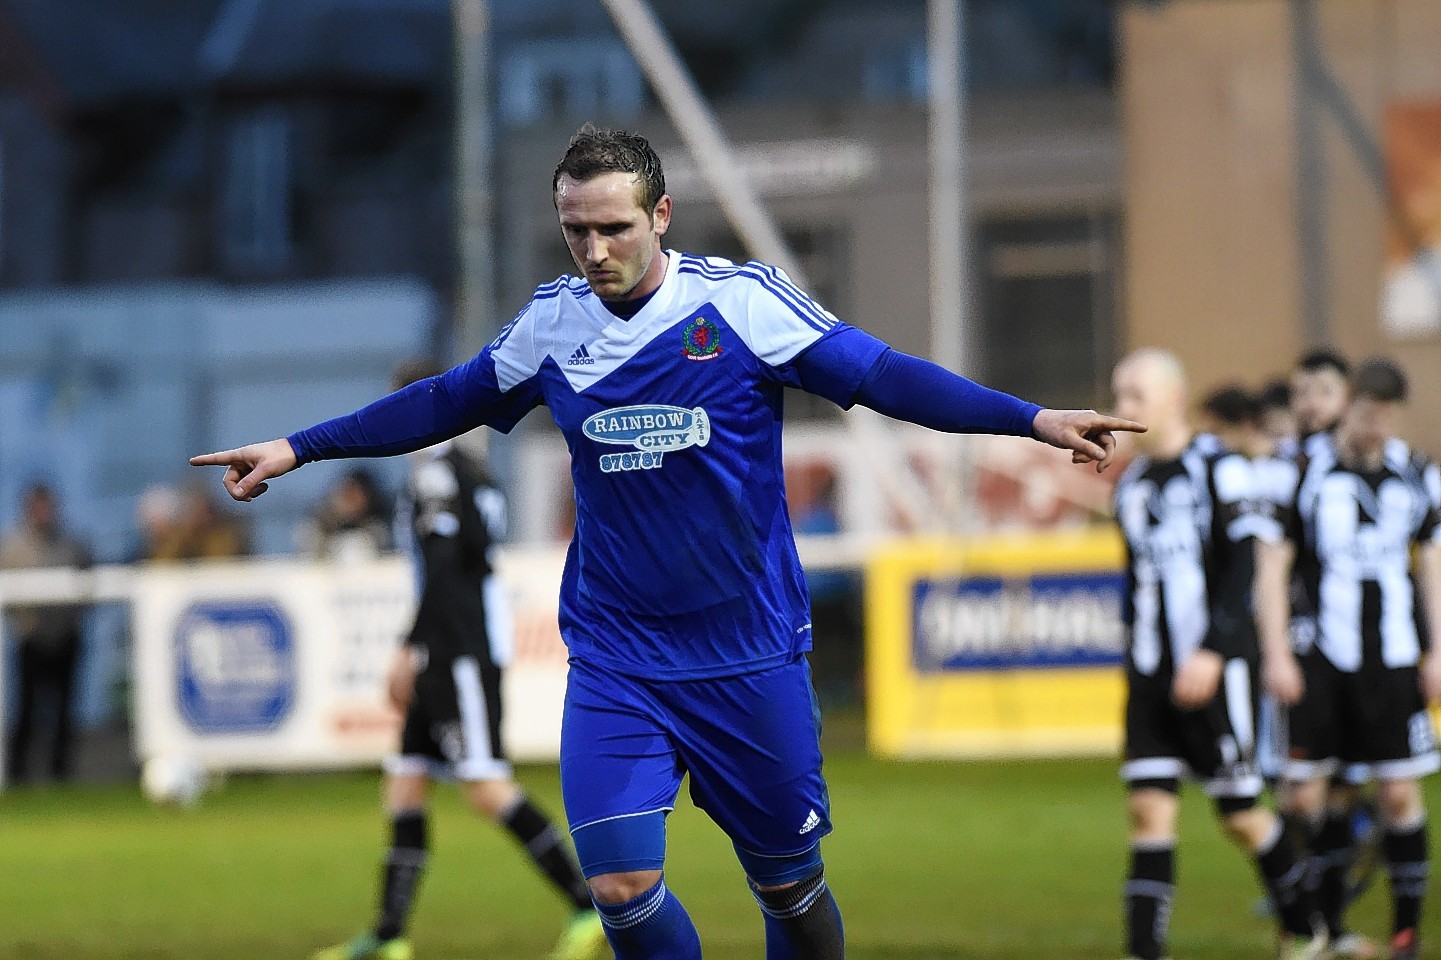 Cove's Jonathan Smith celebrates after scoring against Wick 